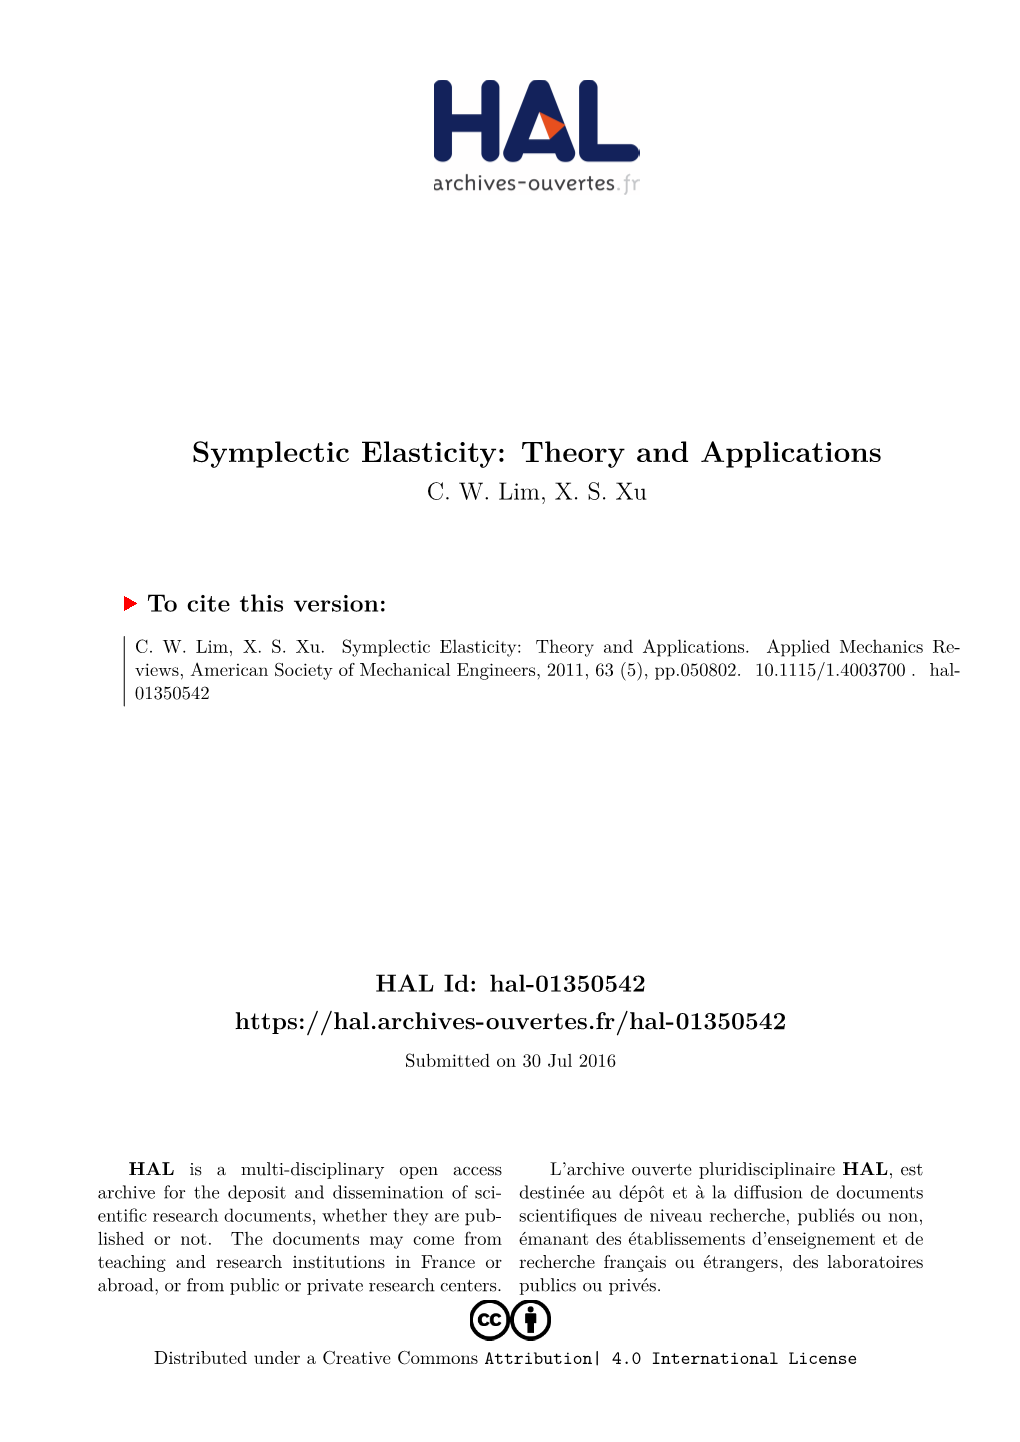 Symplectic Elasticity: Theory and Applications C